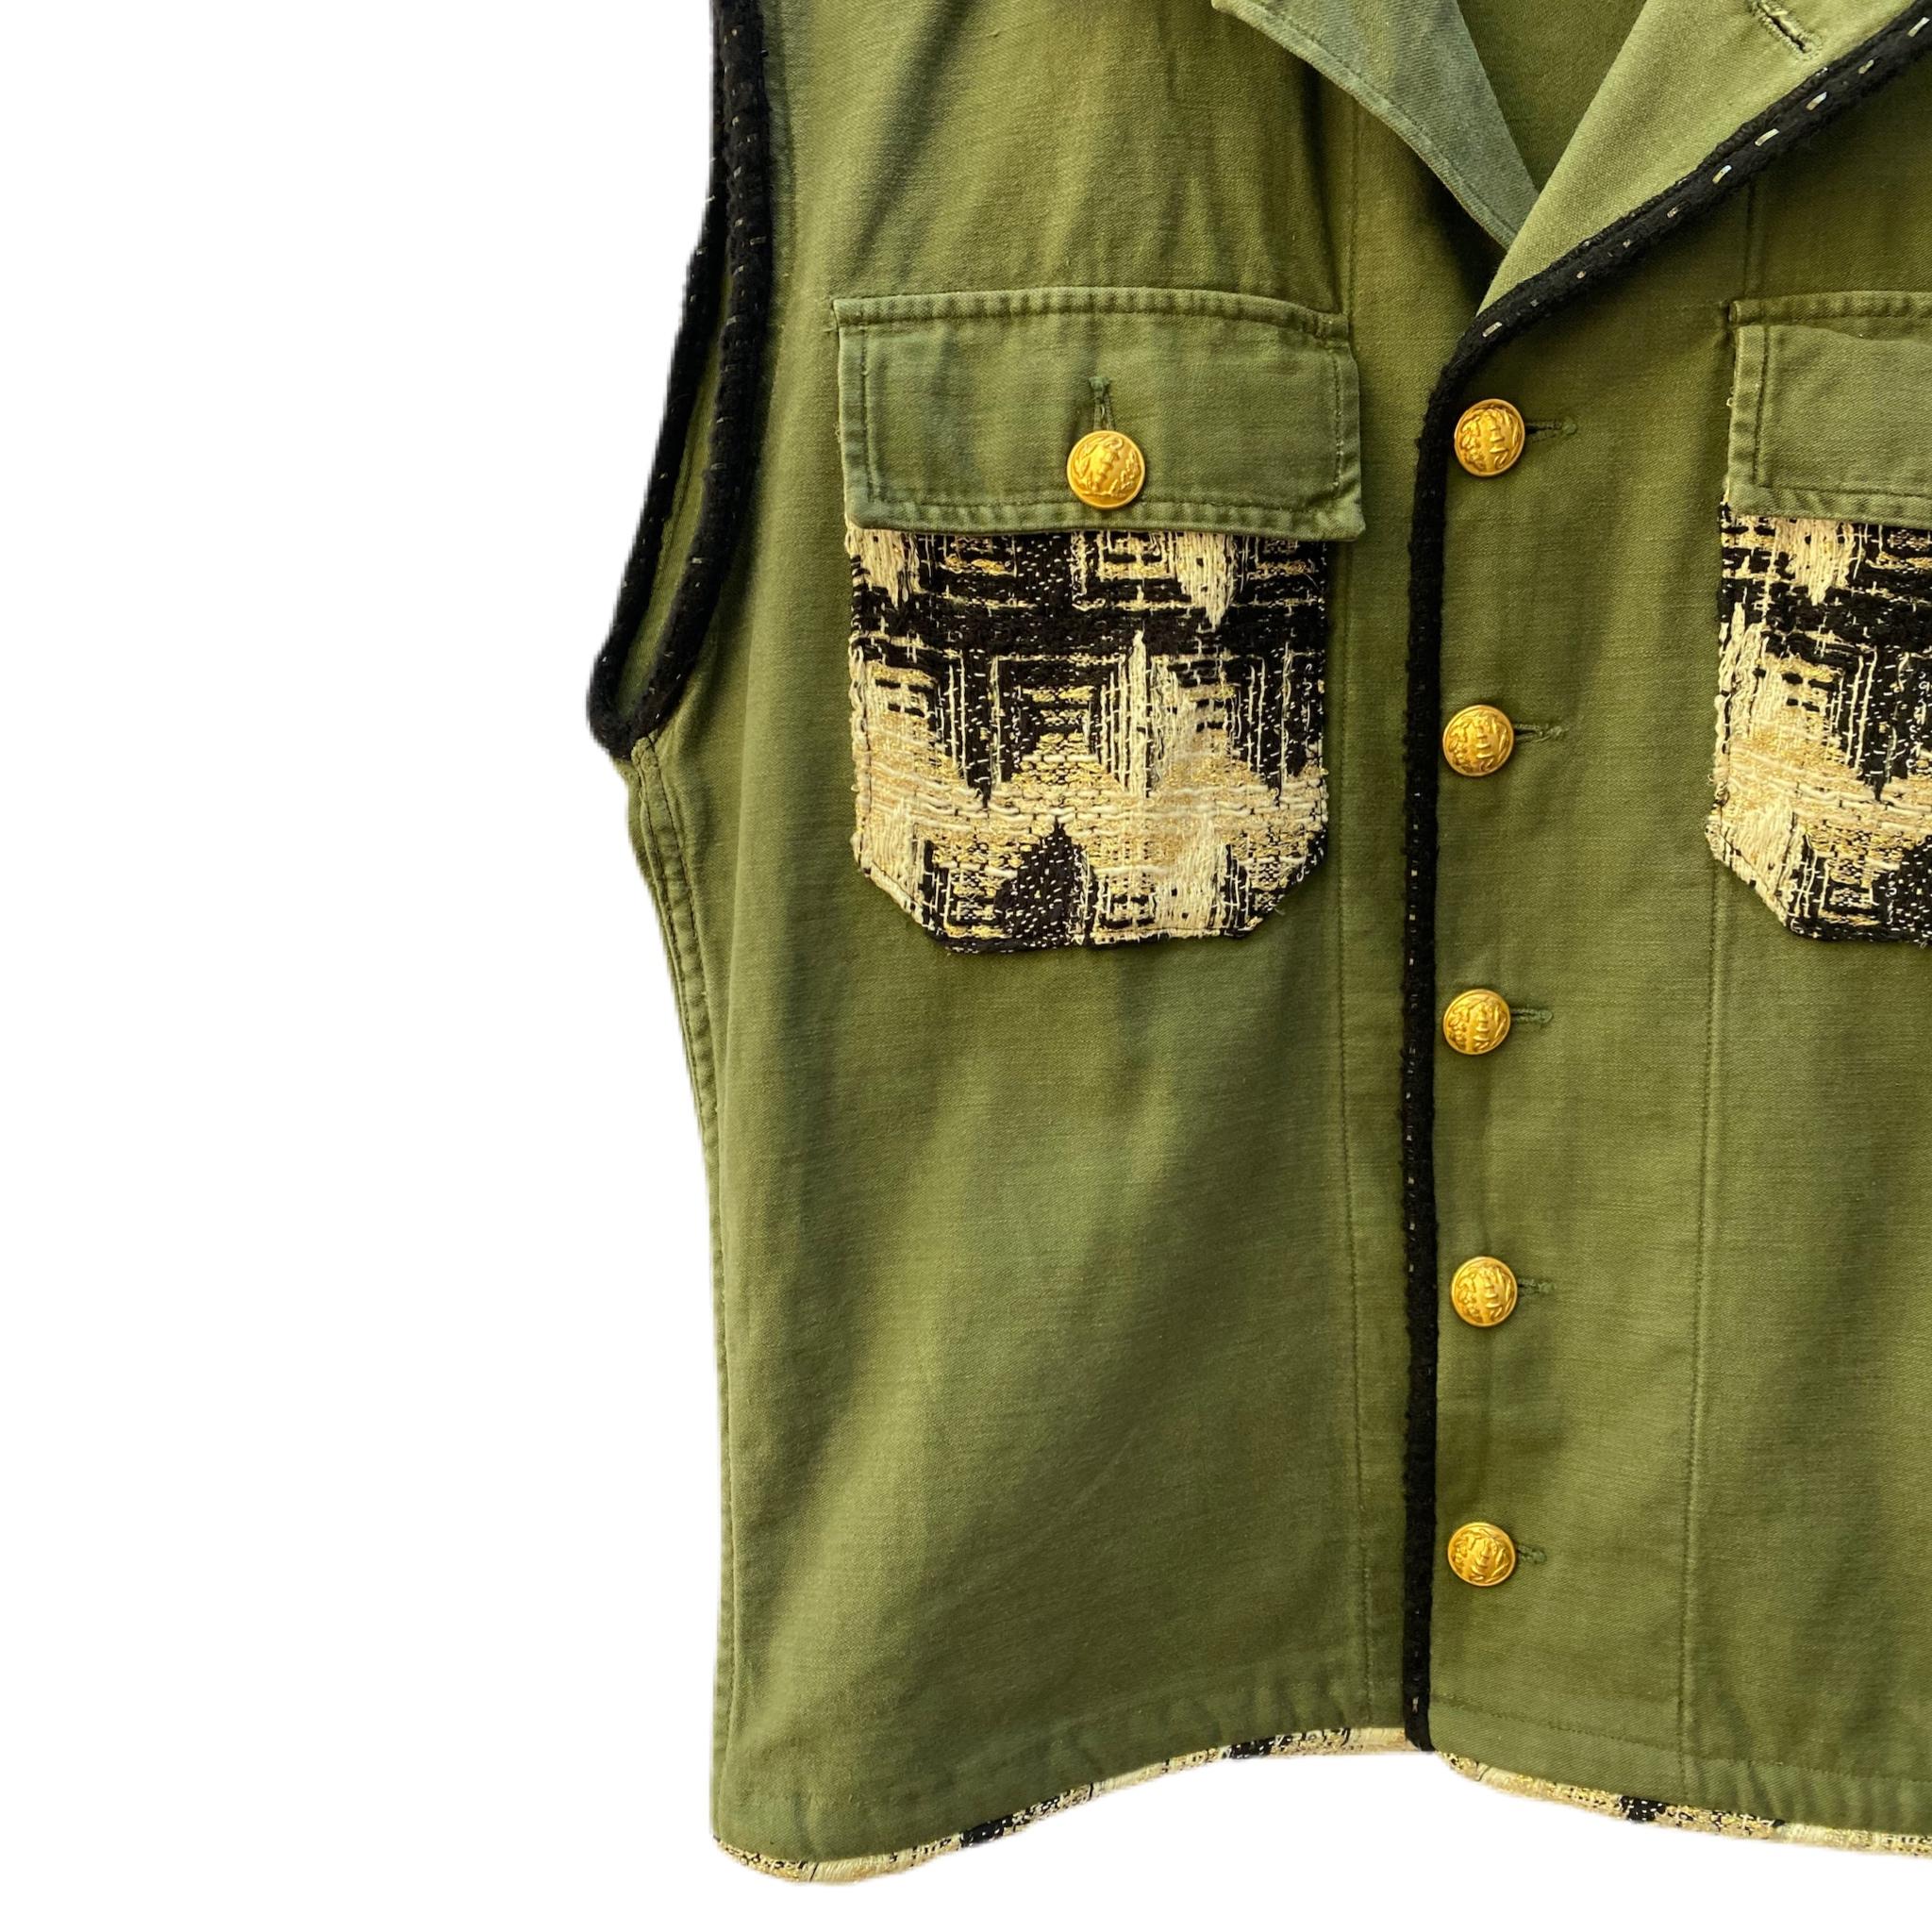 Brown Embellished Green Sleeveless Jacket Vest Military Tweed Gold Buttons J Dauphin